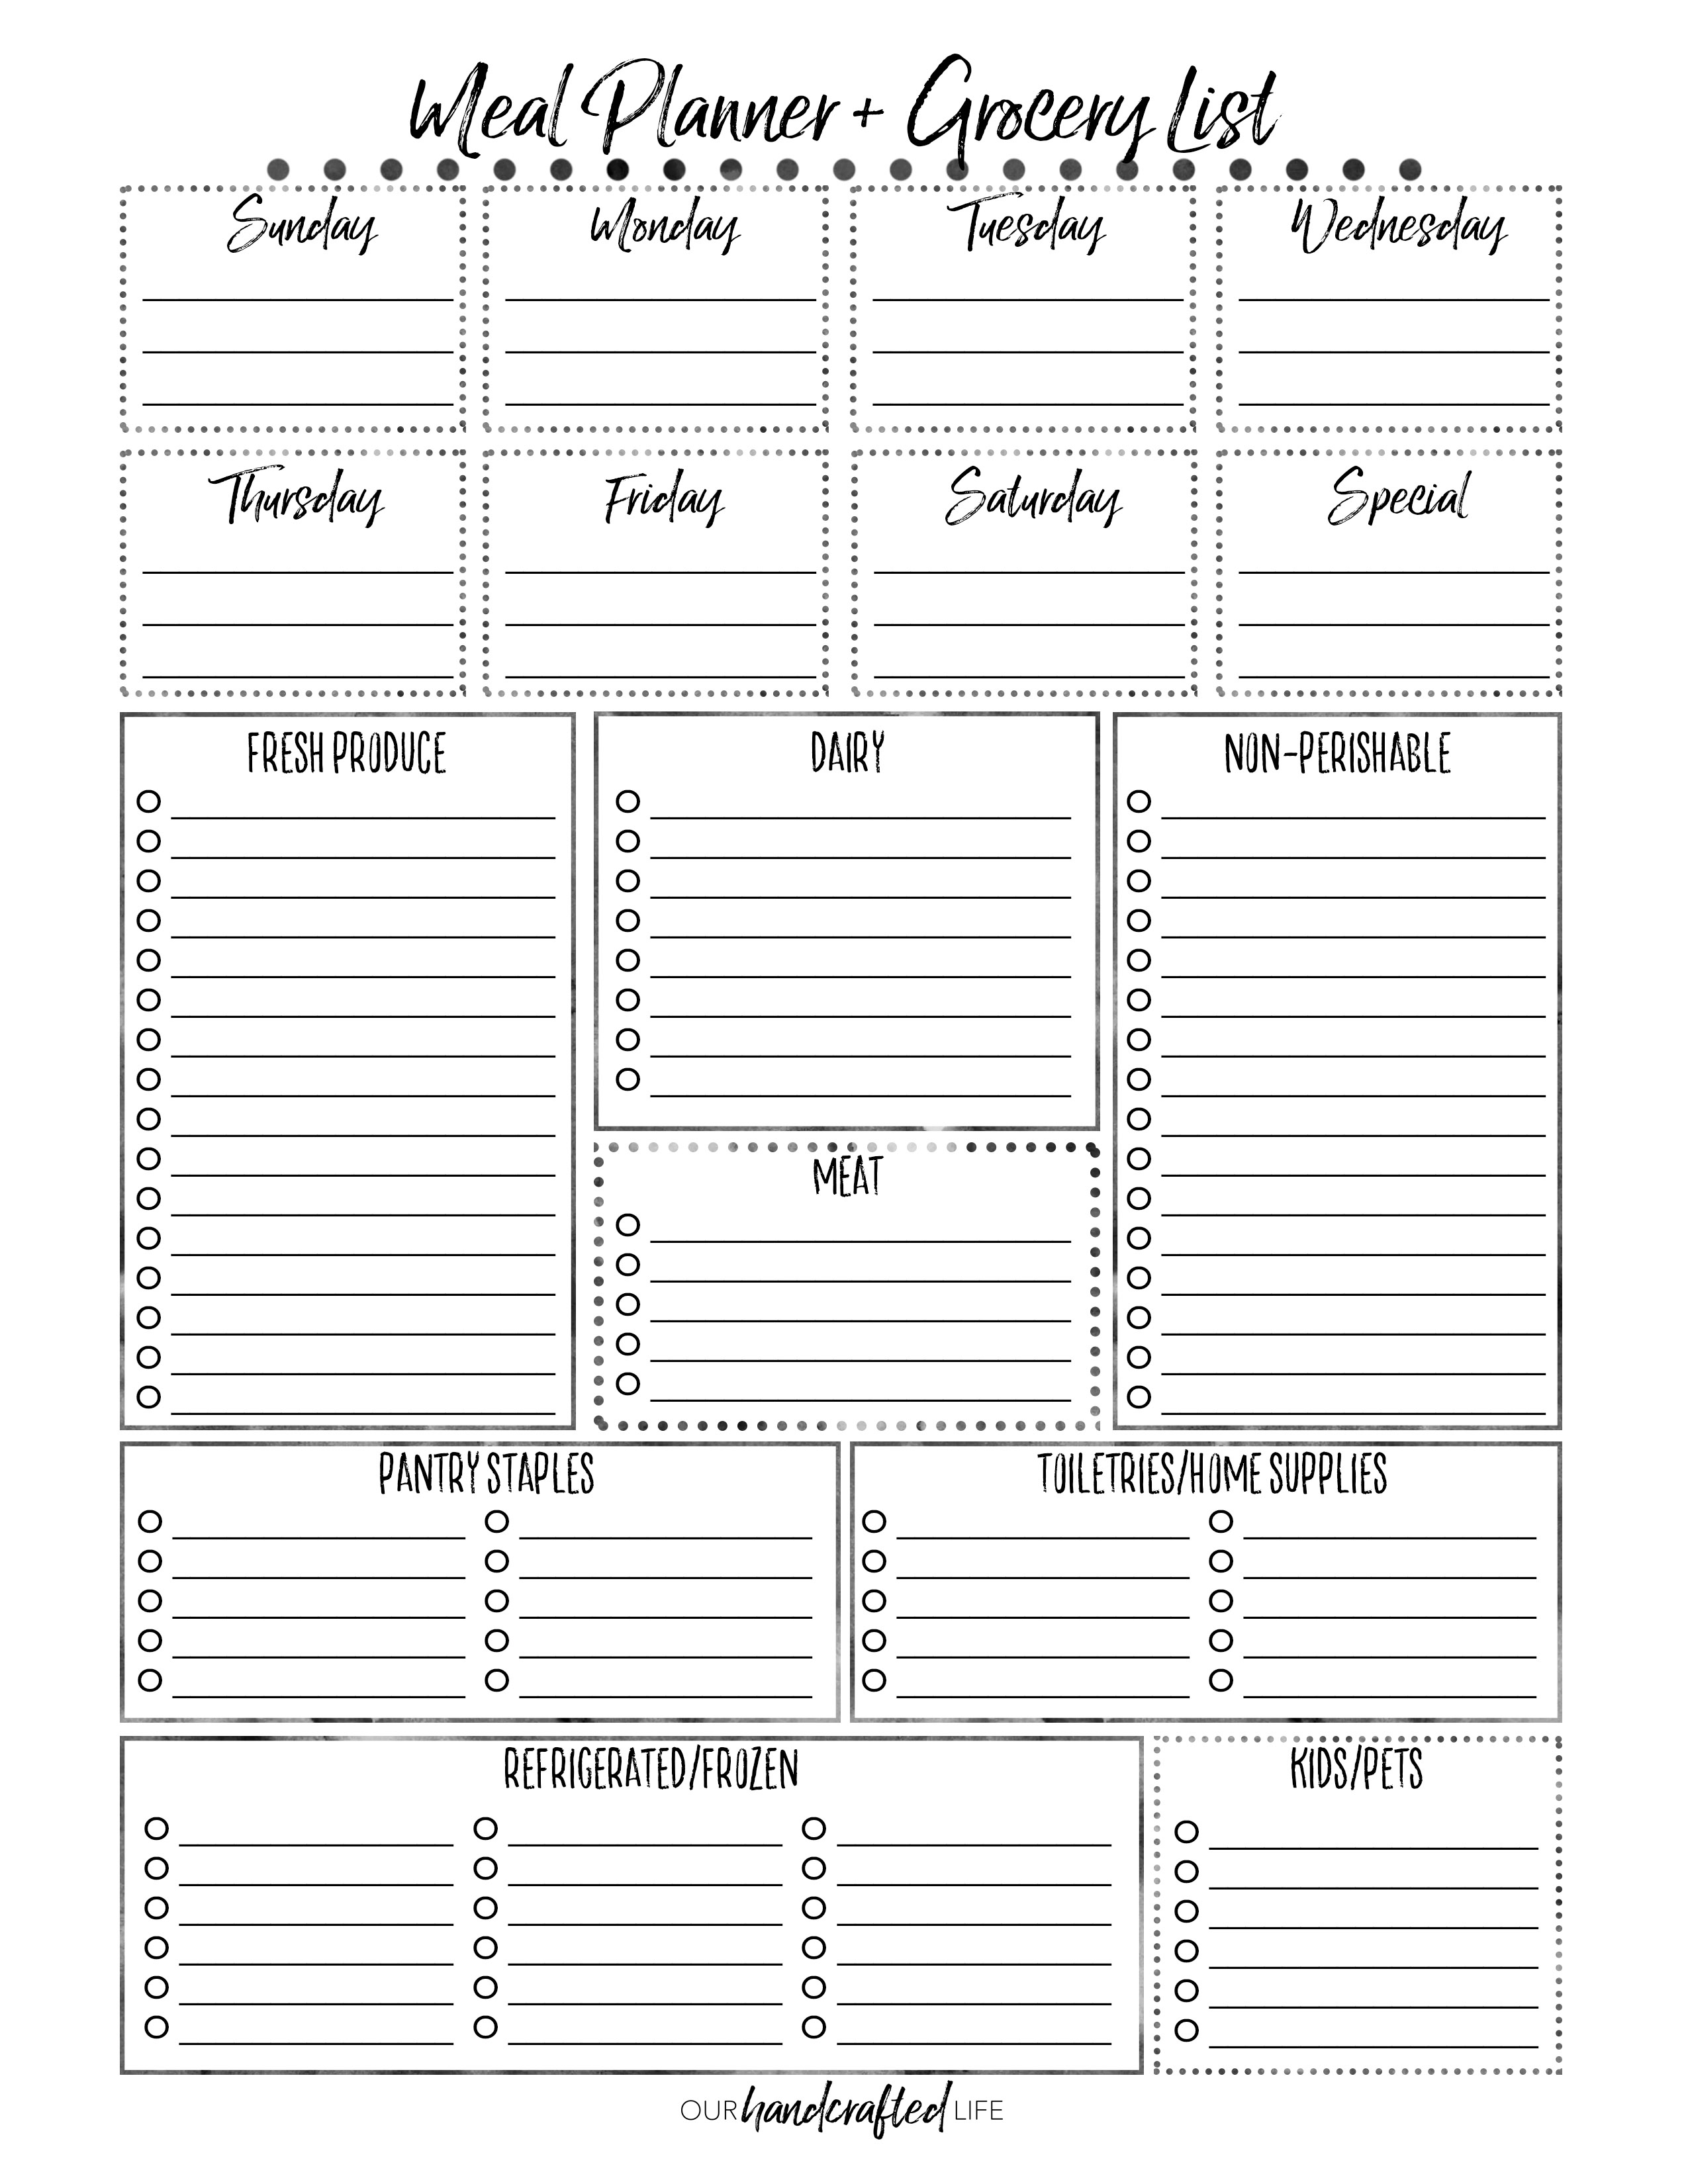 The Most Practical Meal Planner Ever - Our Handcrafted Life - Free Printable Meal Planner